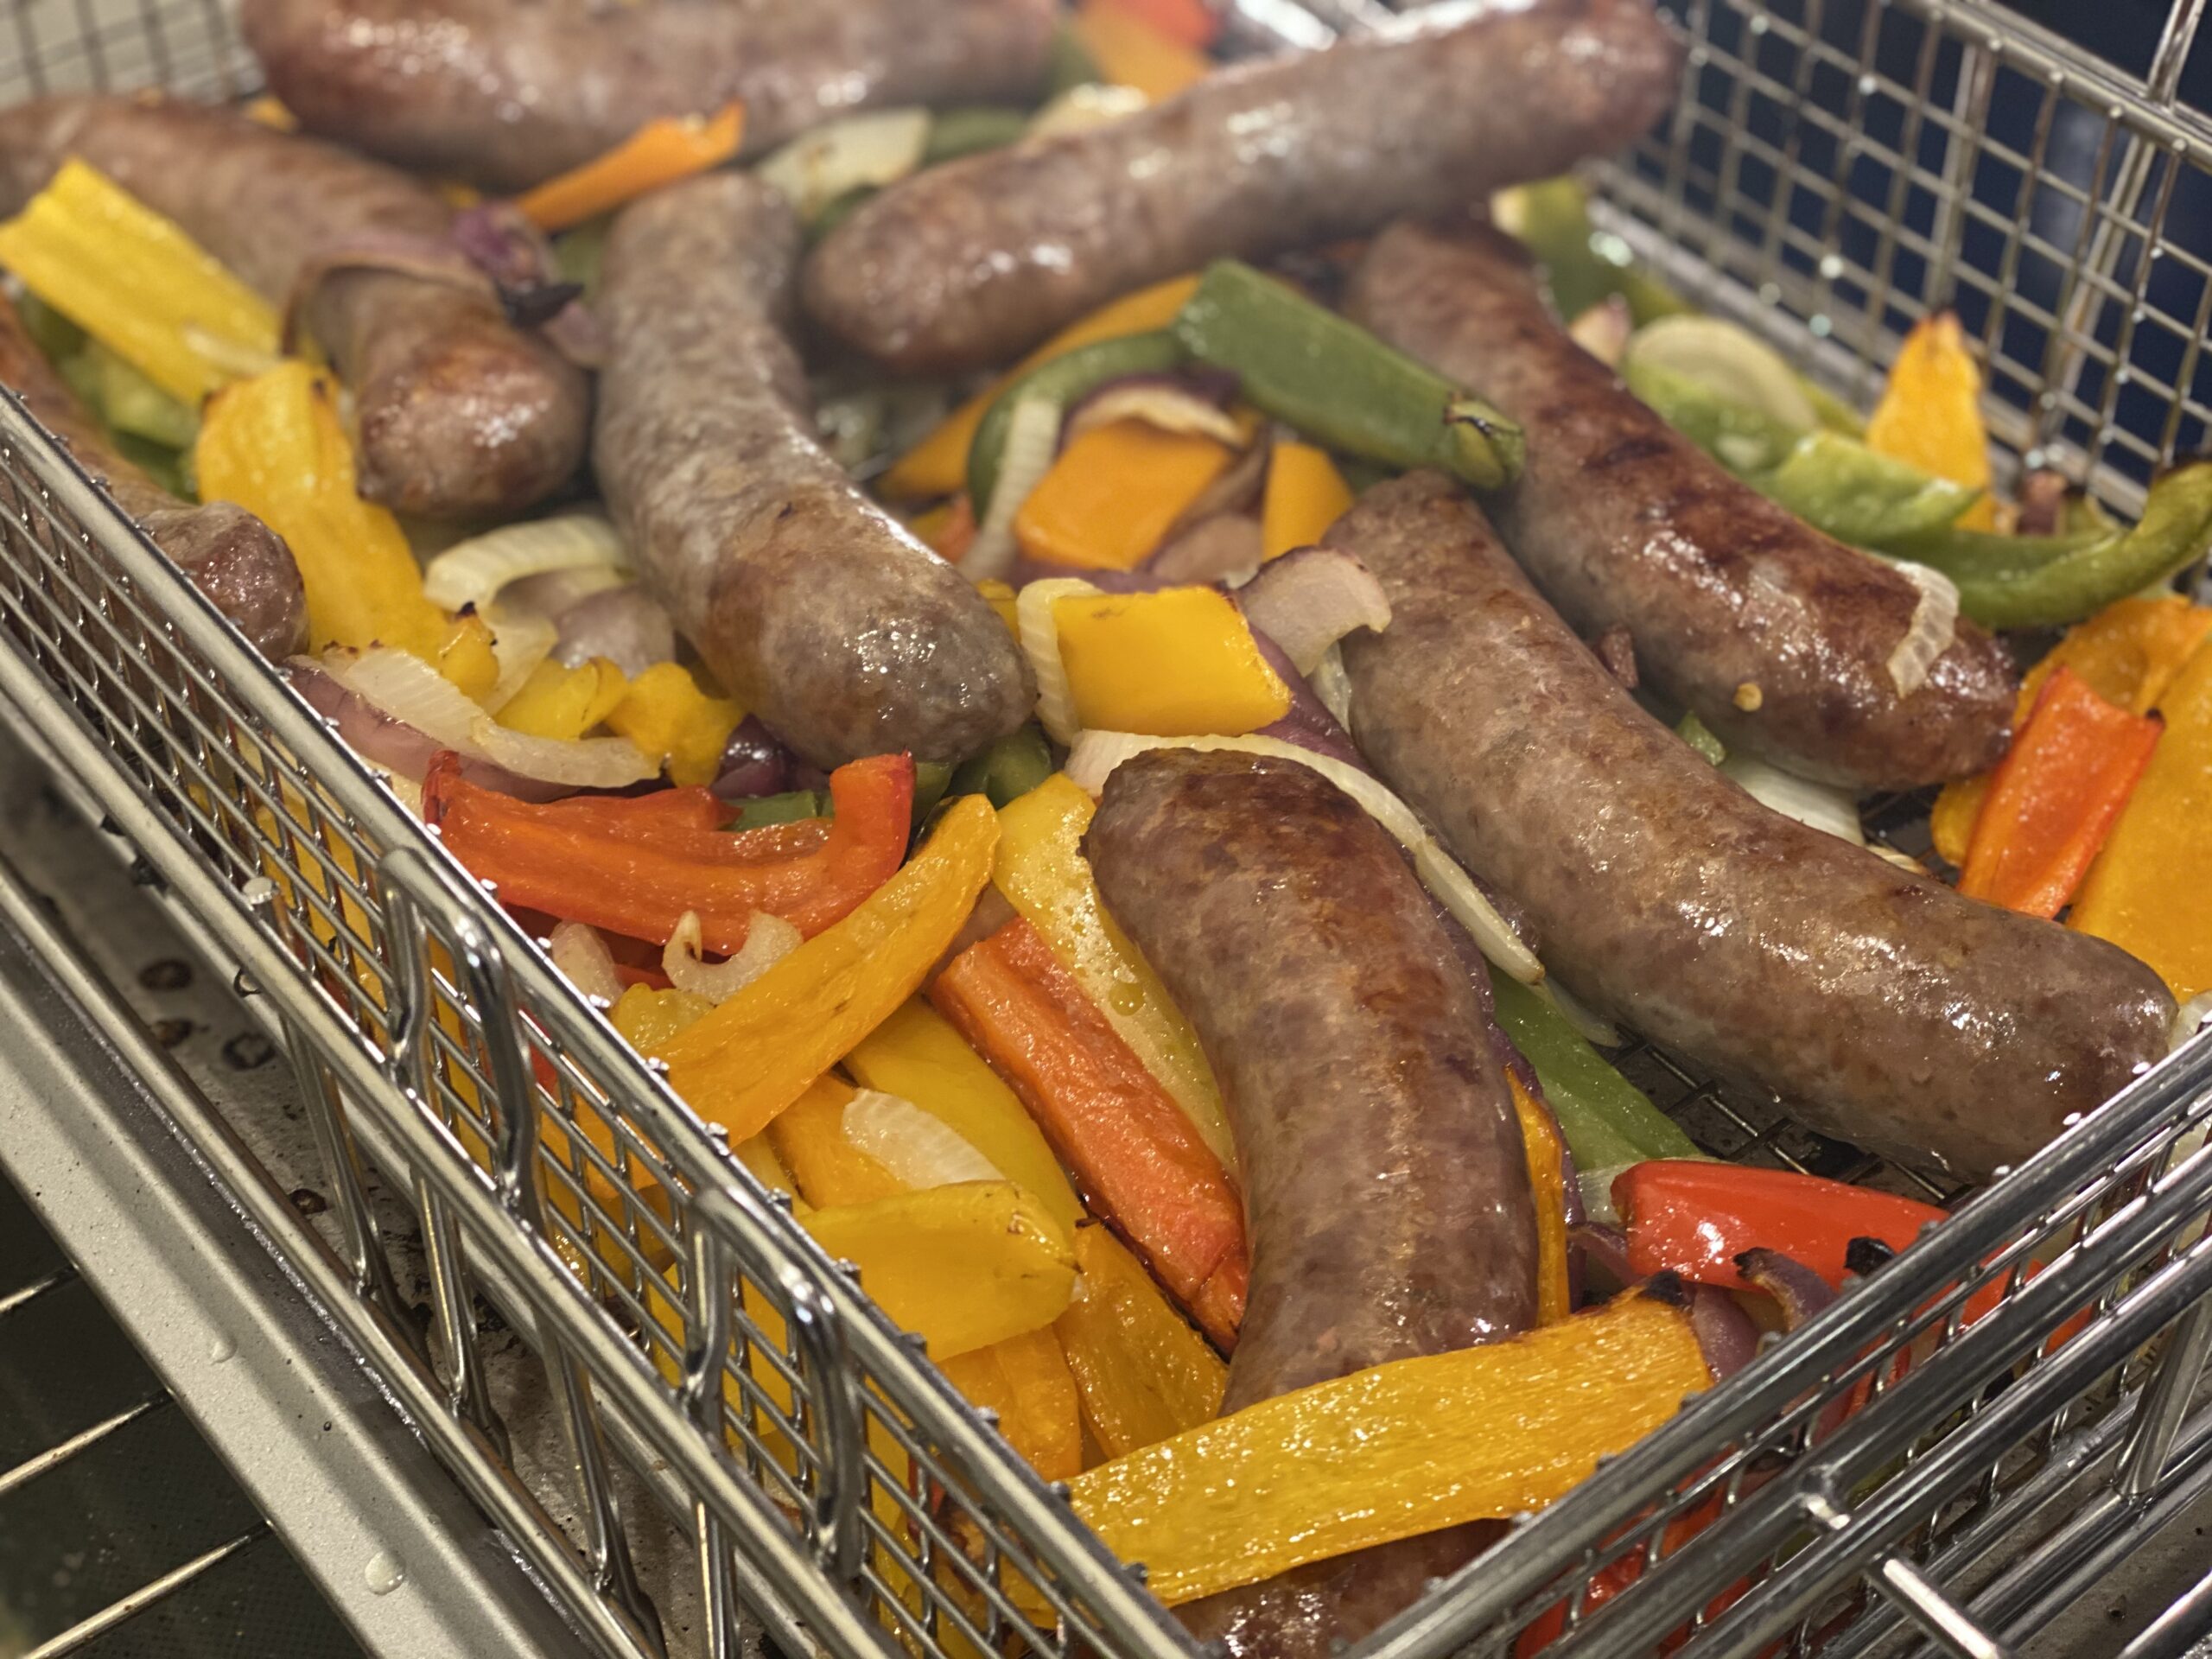 Sausage and veggies in Basquettes